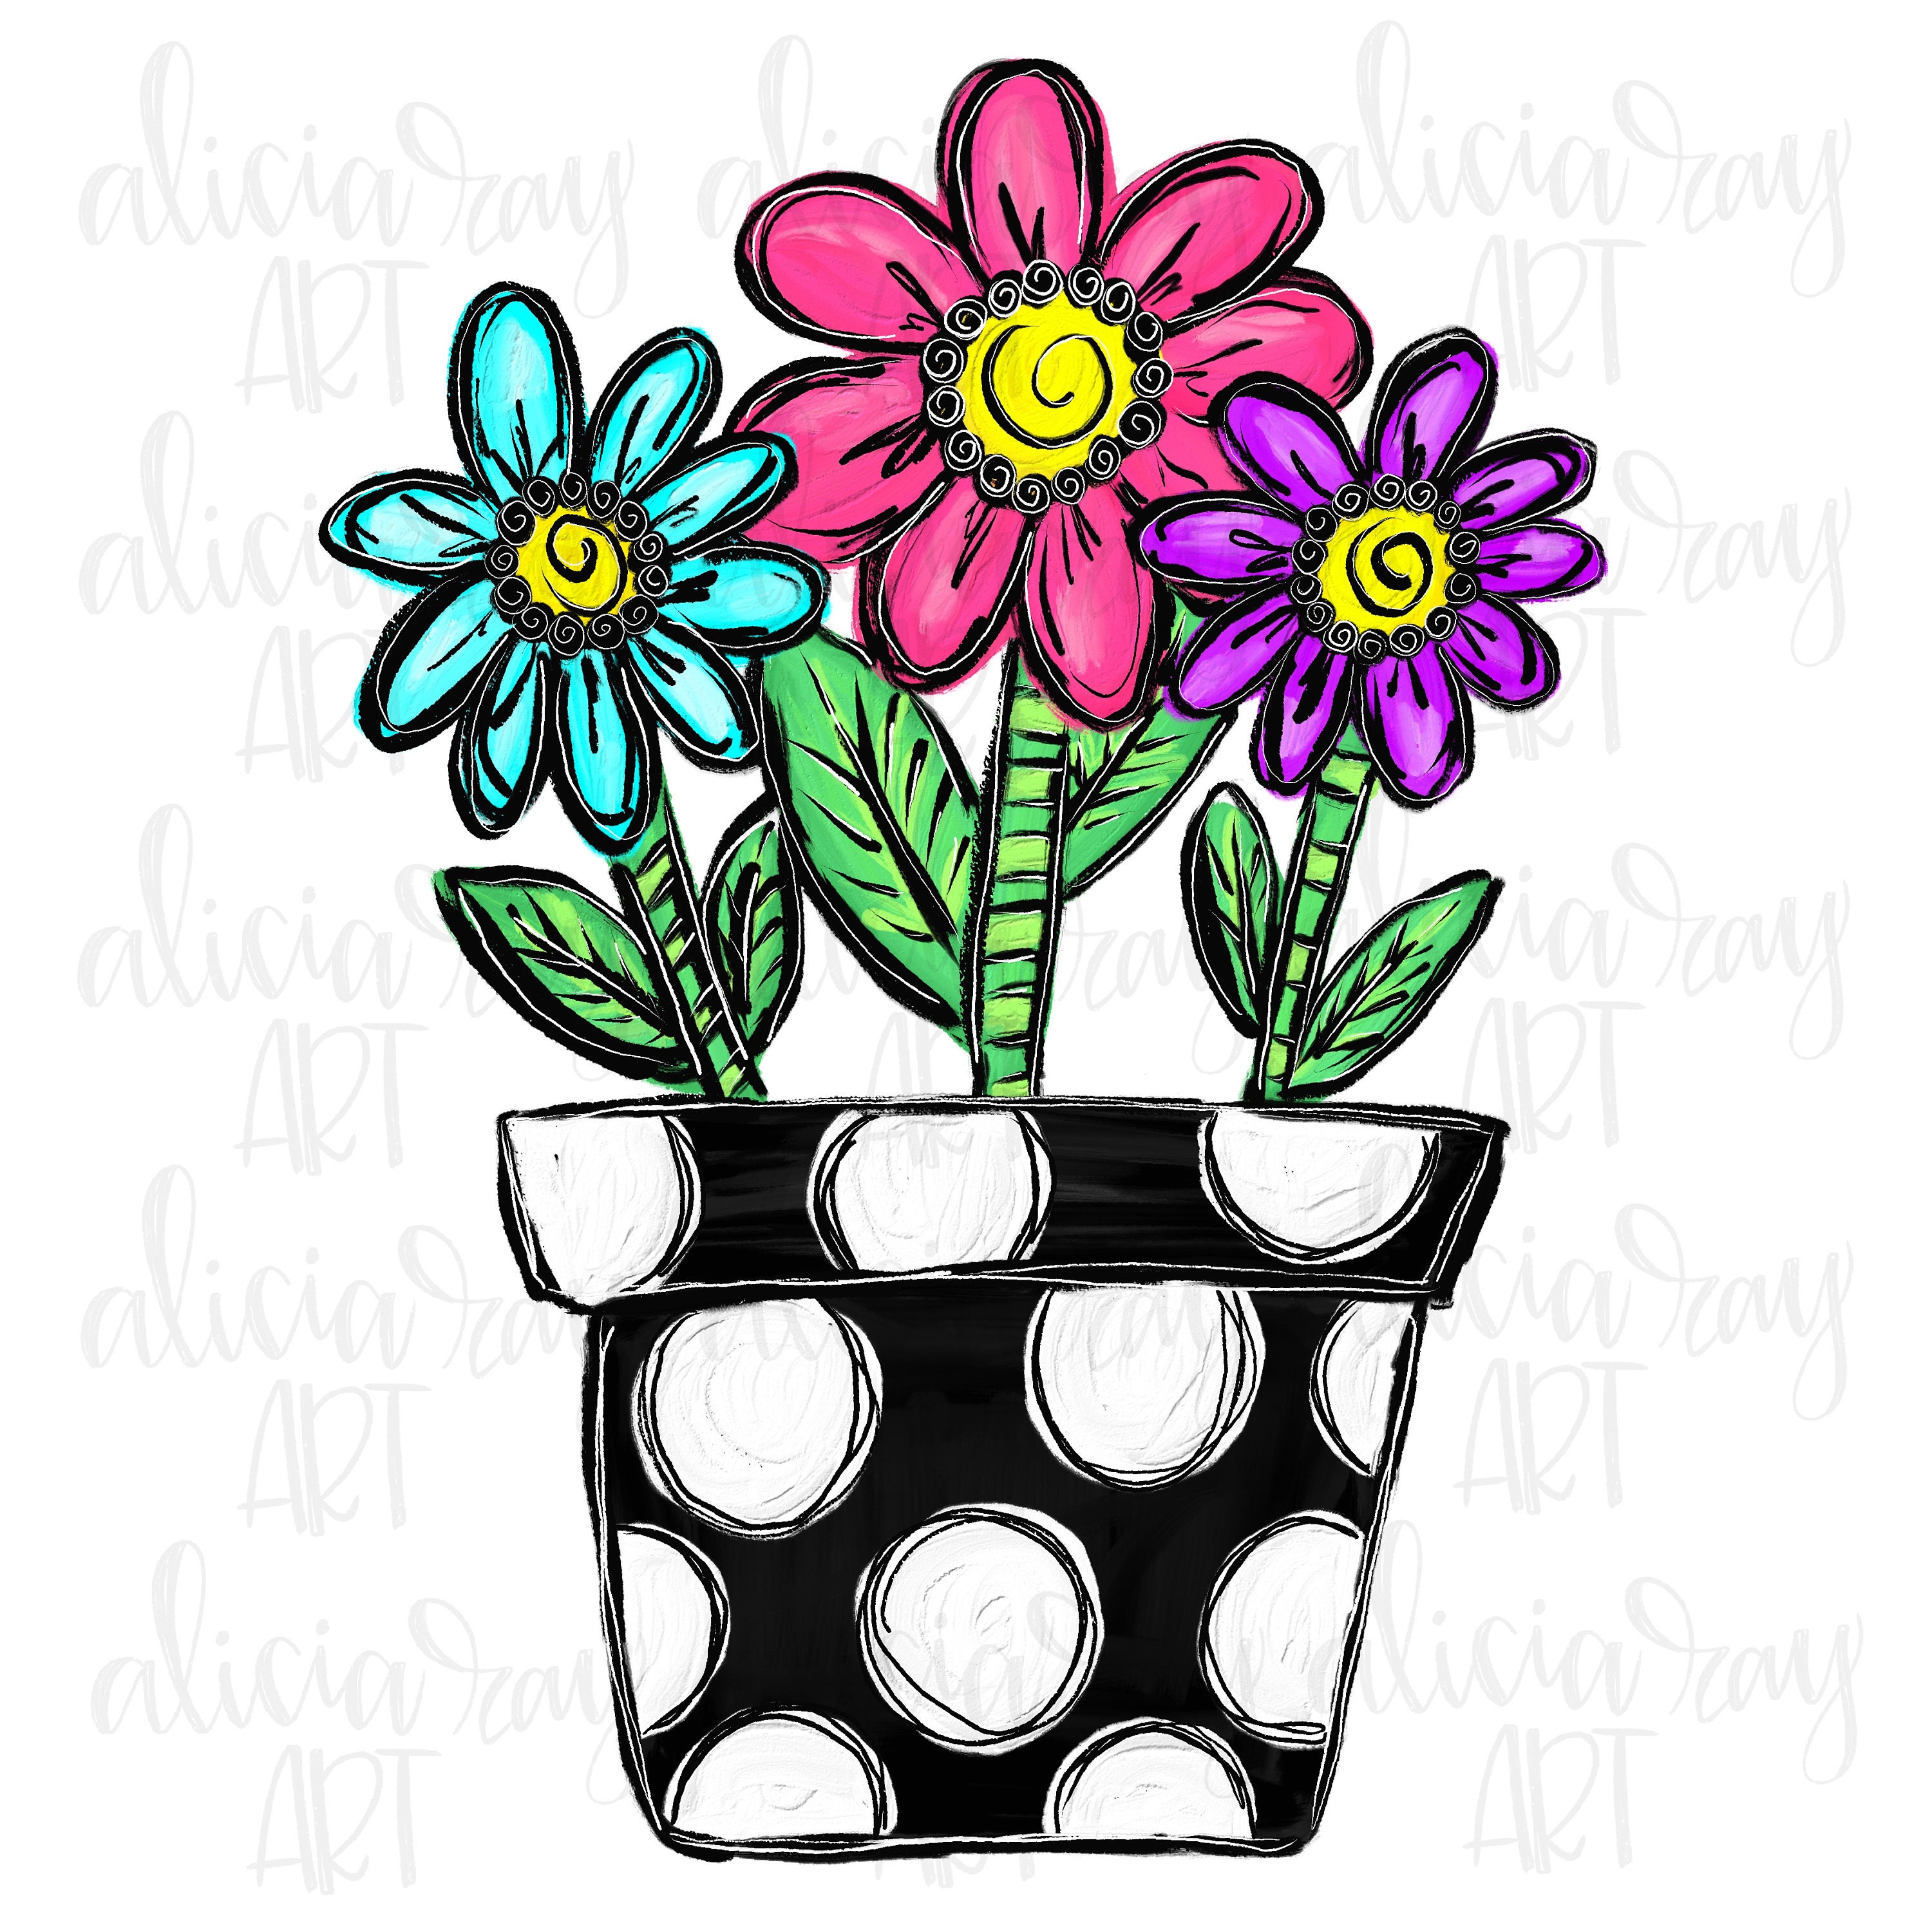 COLORED PENCIL drawing pink flowers in turquoise color pot | eBay